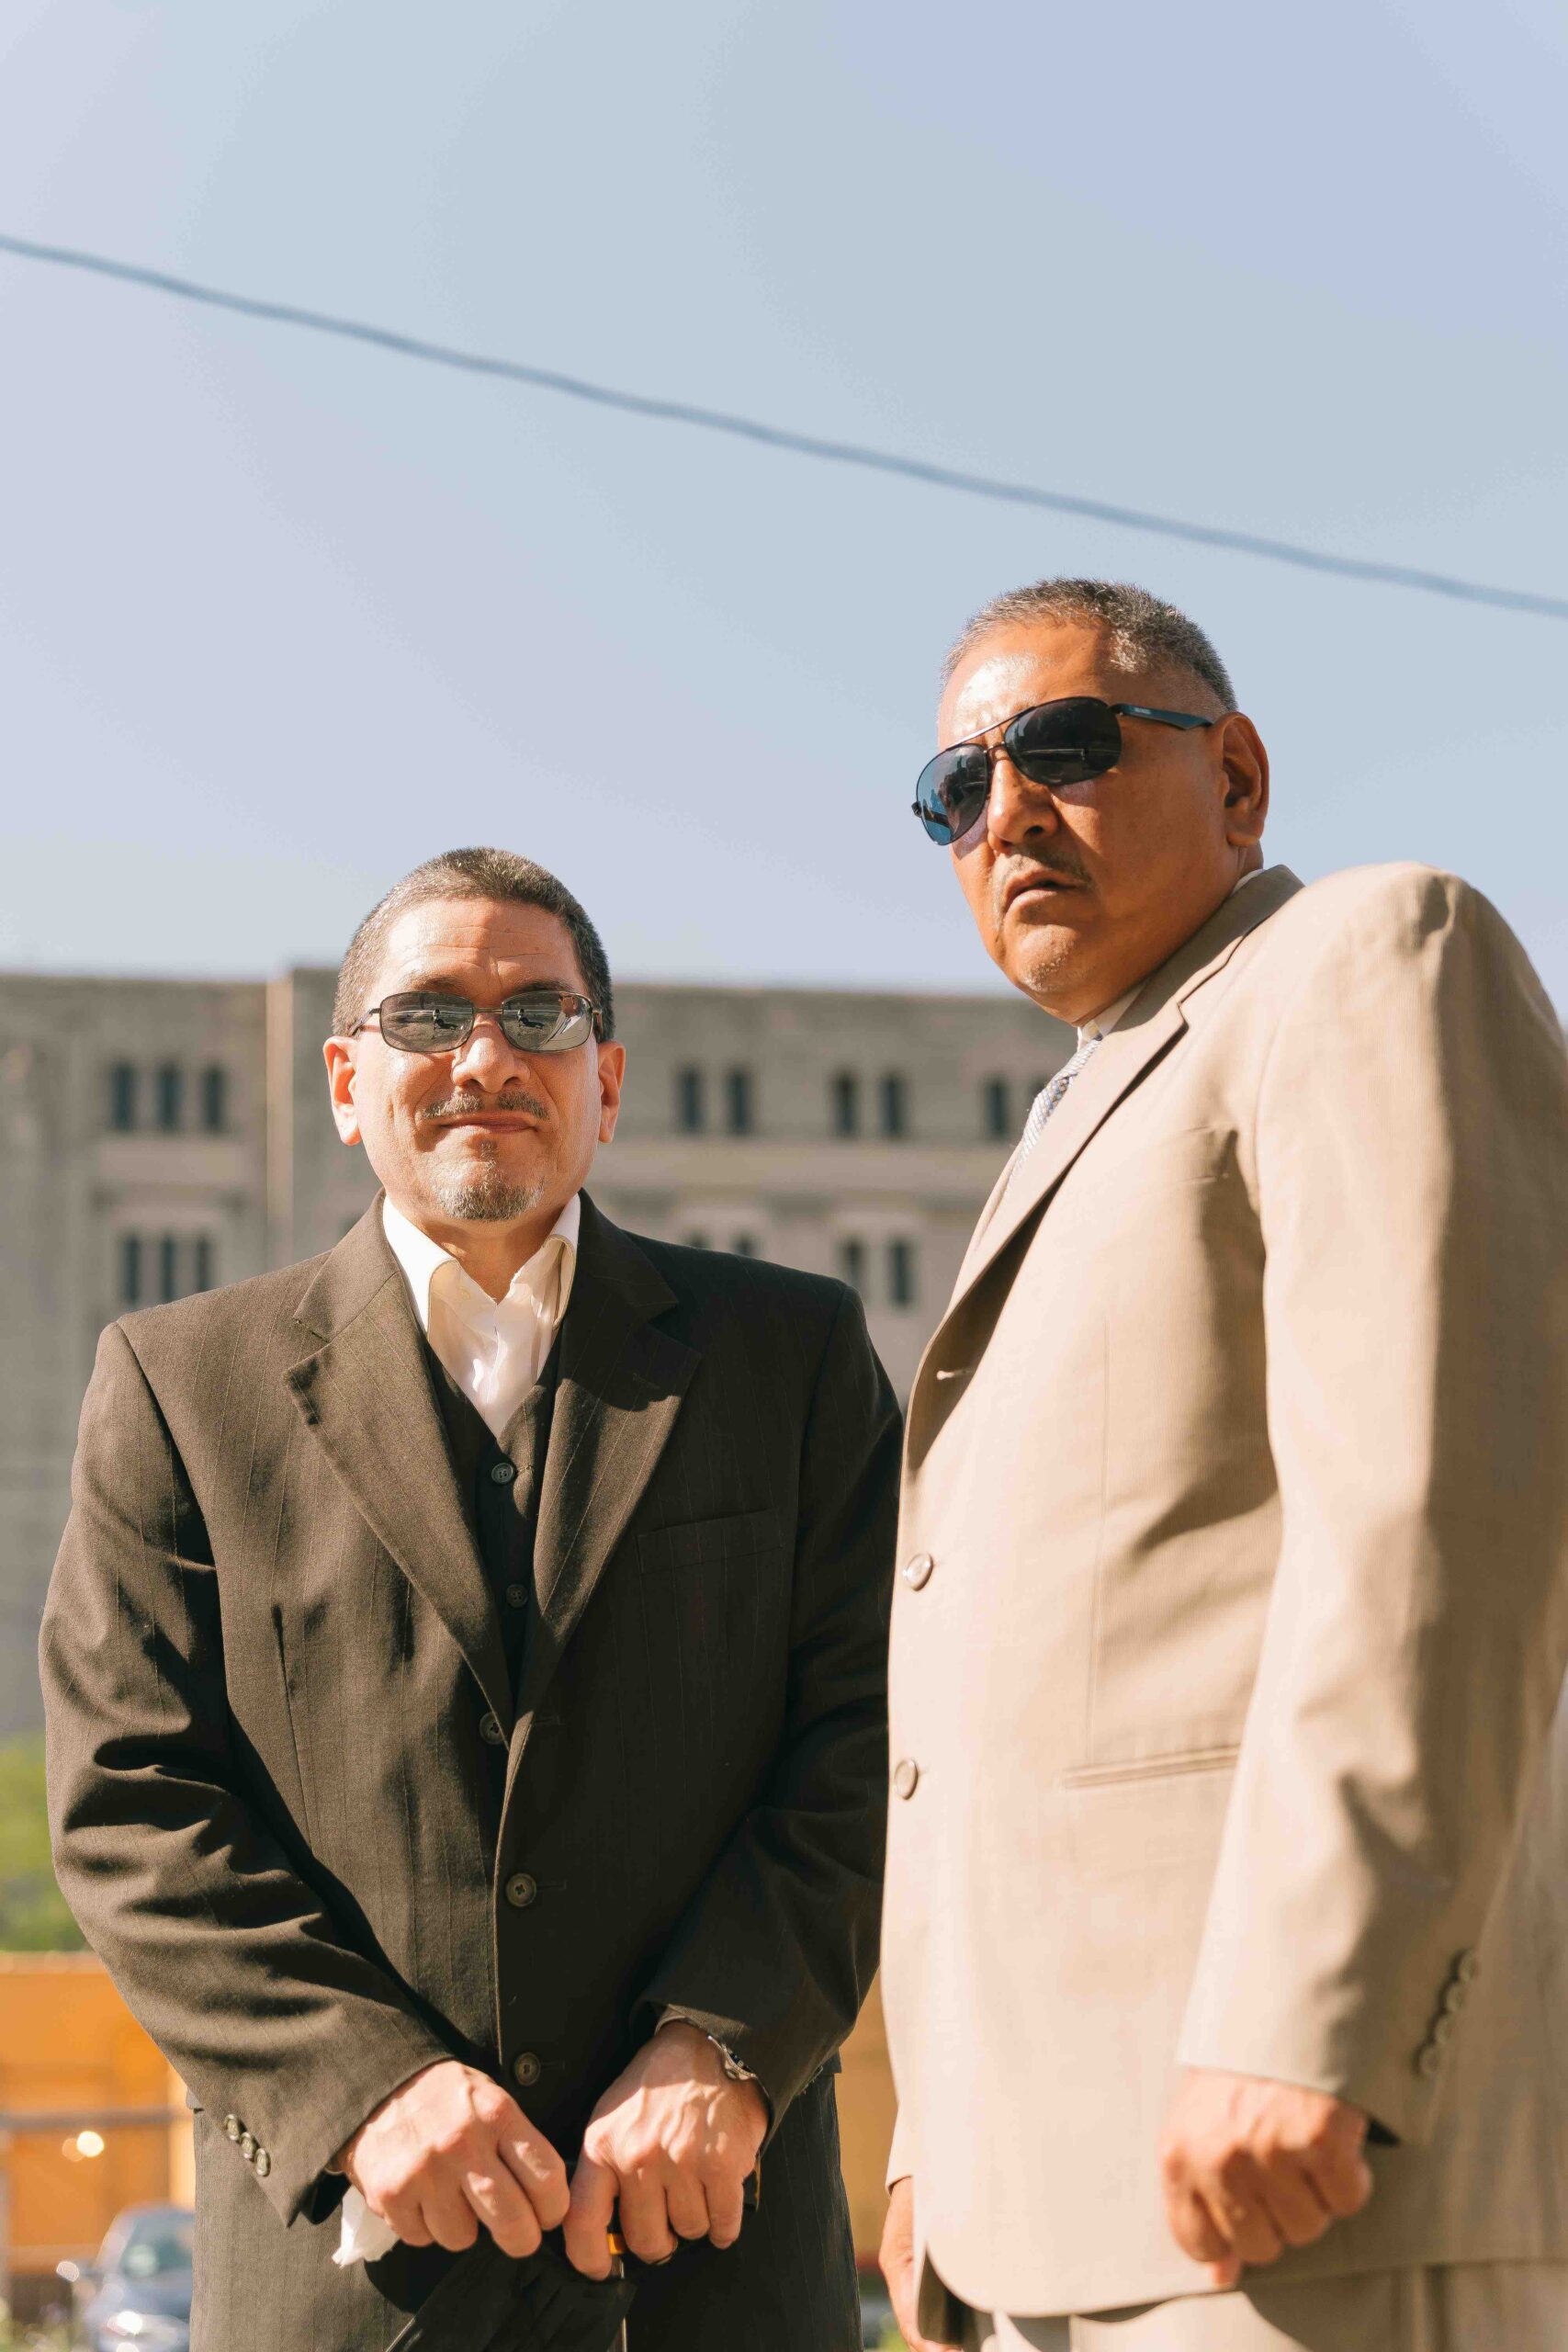 John Galvan and his co-defendant Arthur Almendarez, who is represented by Joshua Tepfer of the Exoneration Project, after their exoneration on July 21, 2022. (Image: Ray Abercrombie/Innocence Project)